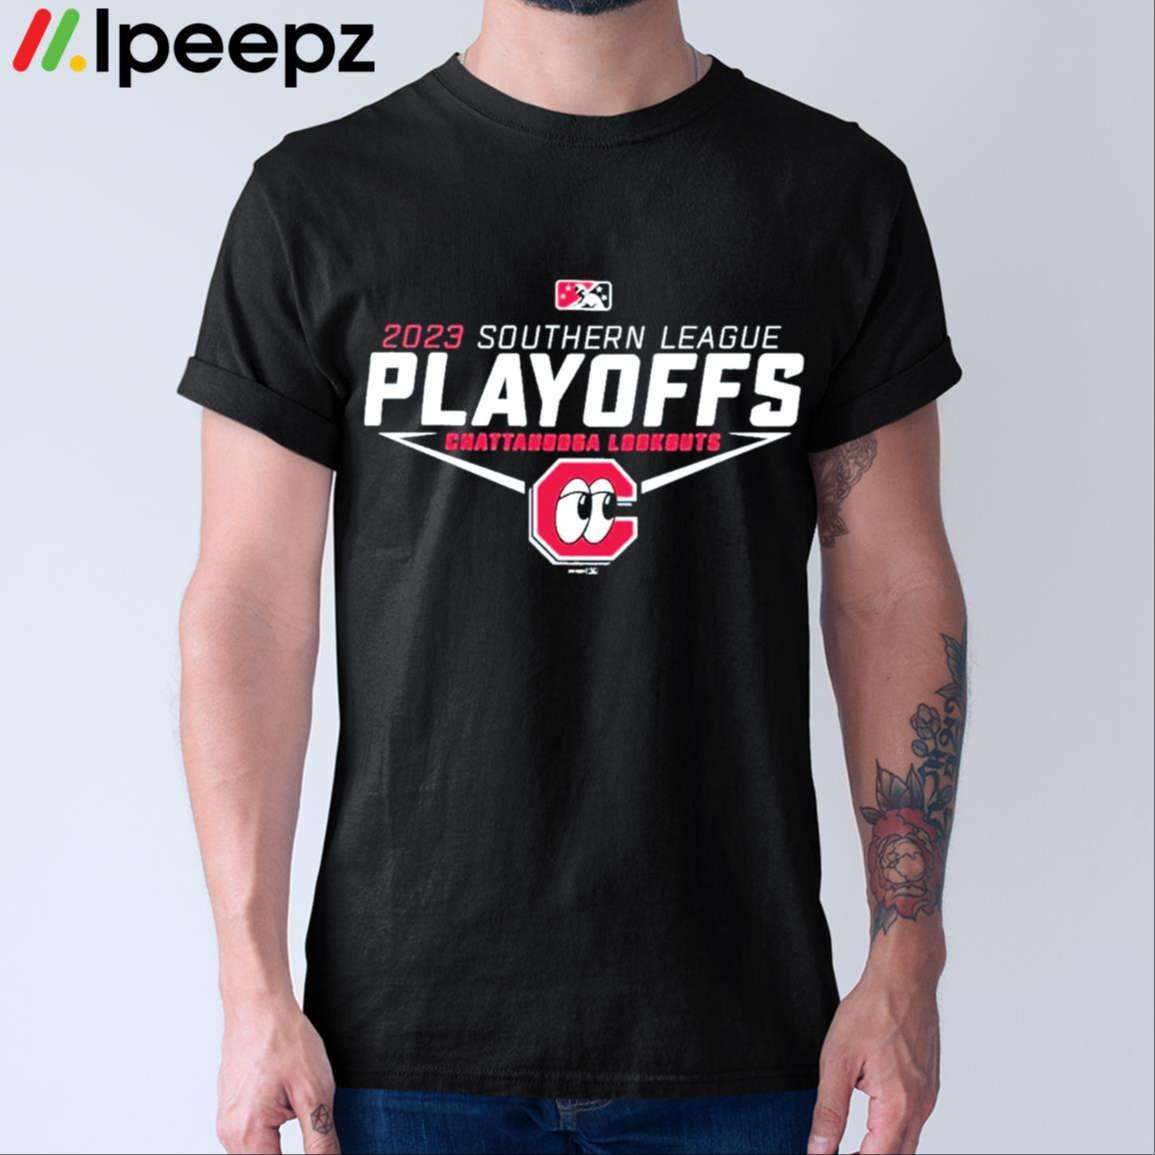 Ipeepz Chattanooga Lookouts 2023 Southern League Playoffs Shirt